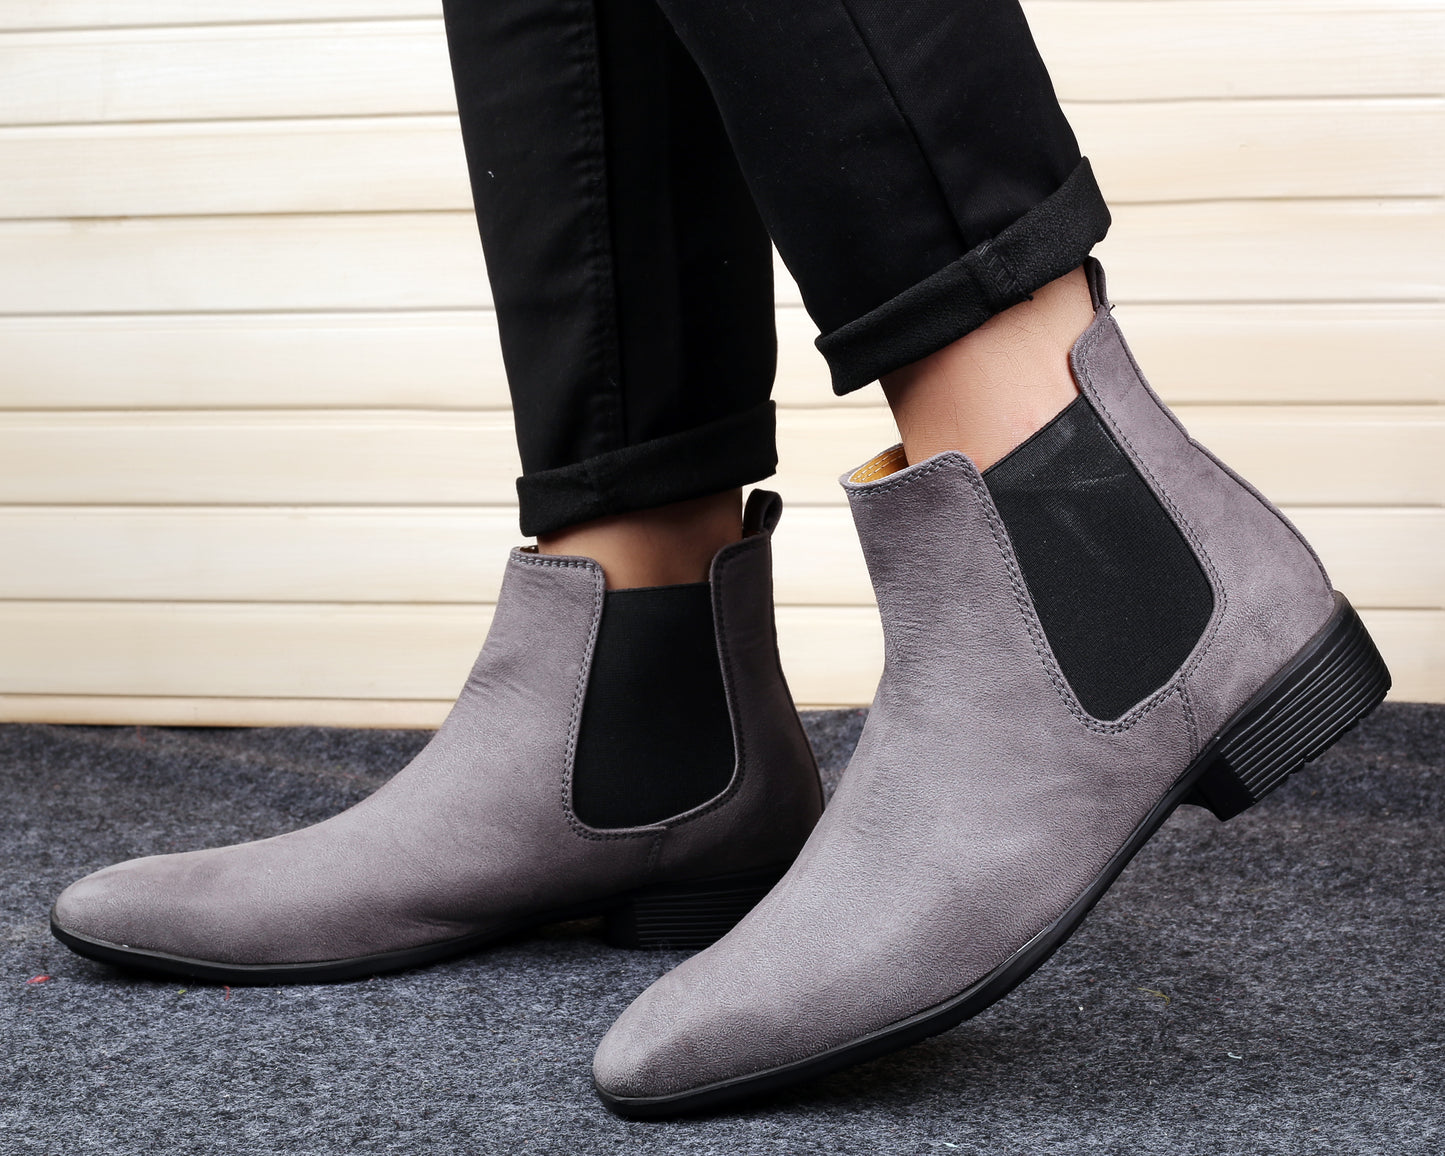 Men's Vegan Suede Material Formal & Casual Party Wear Chelsea Boots